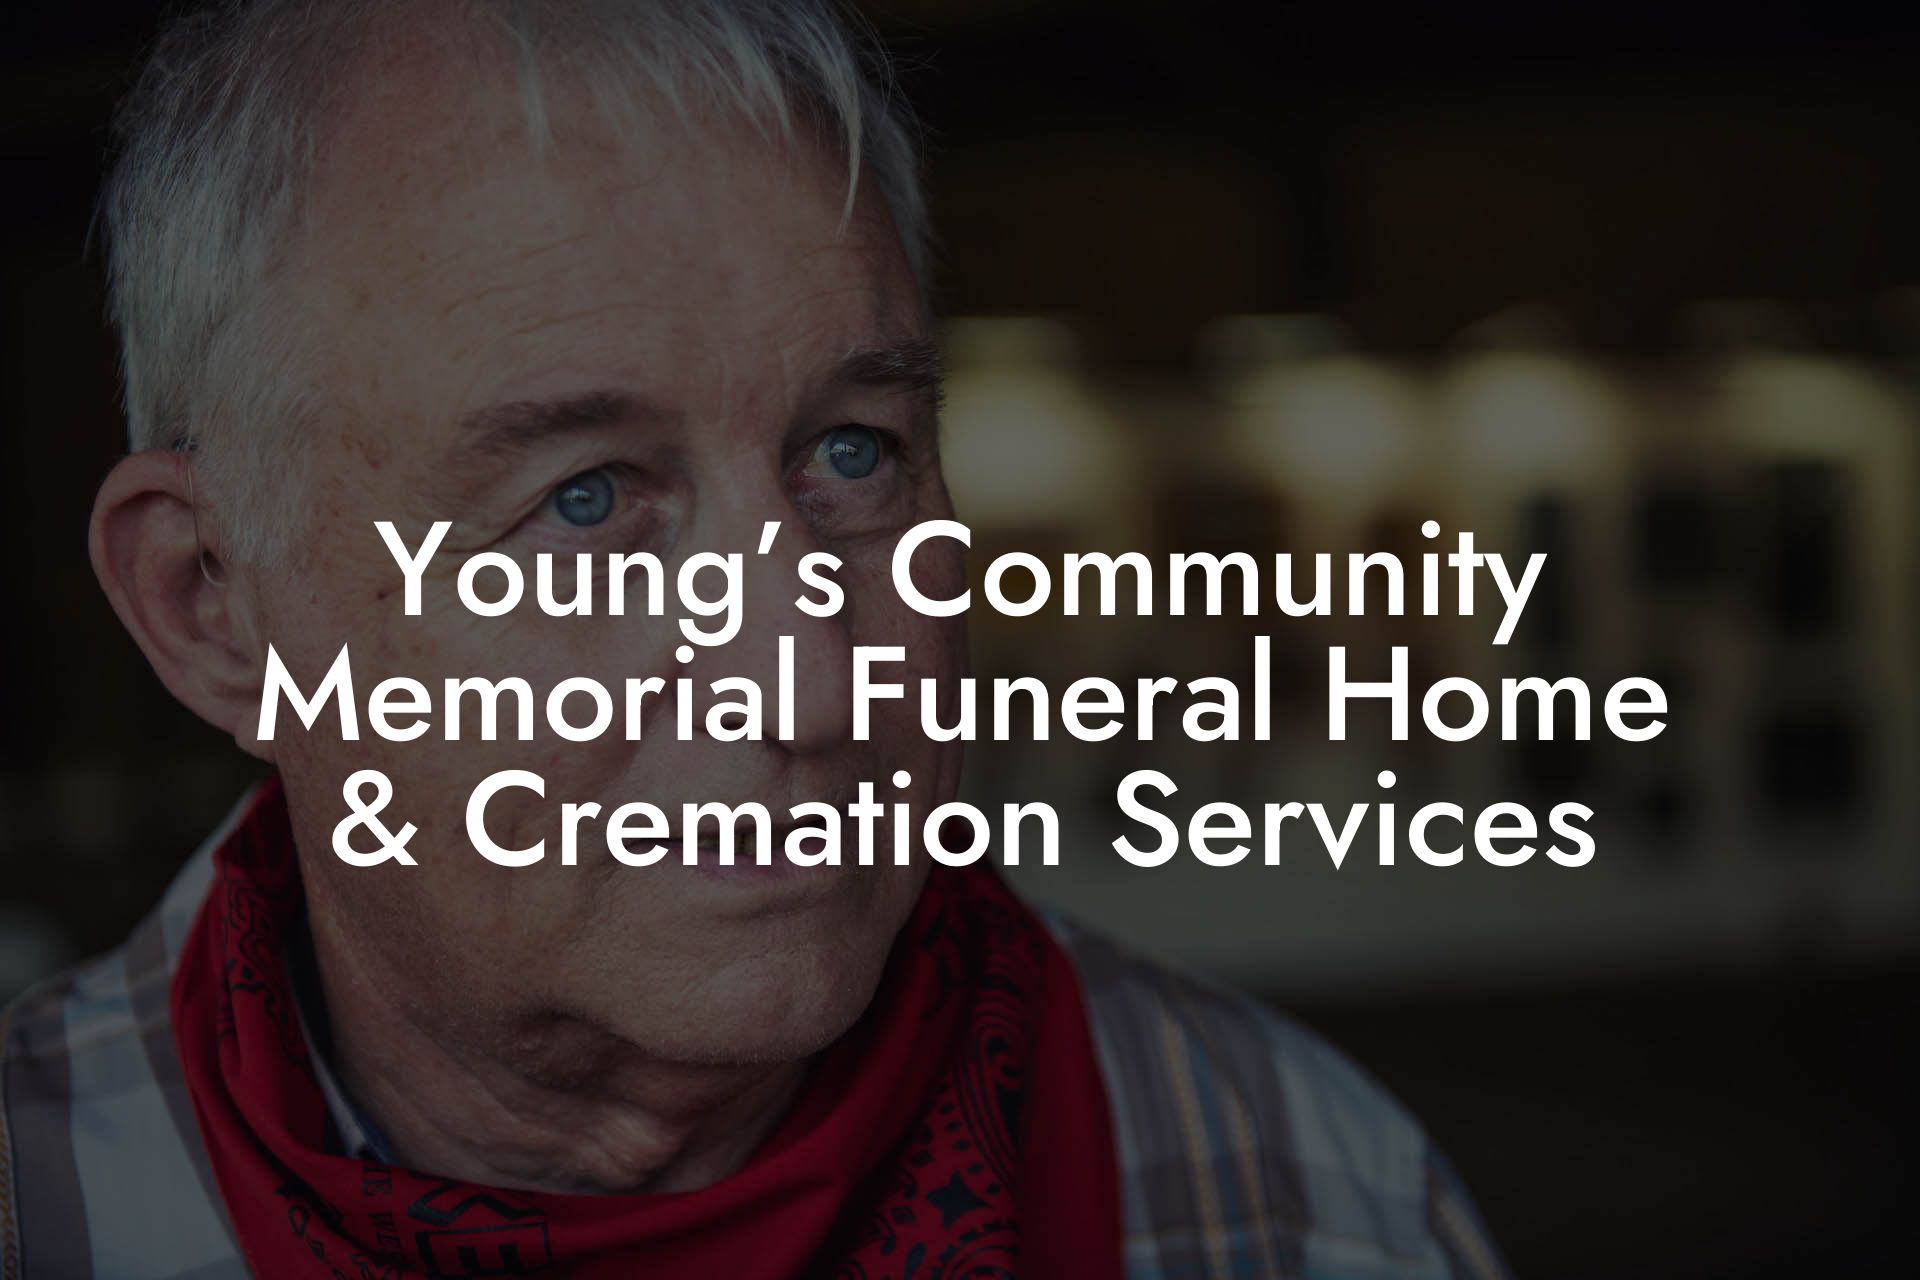 Young's community memorial funeral home & cremation services obituaries